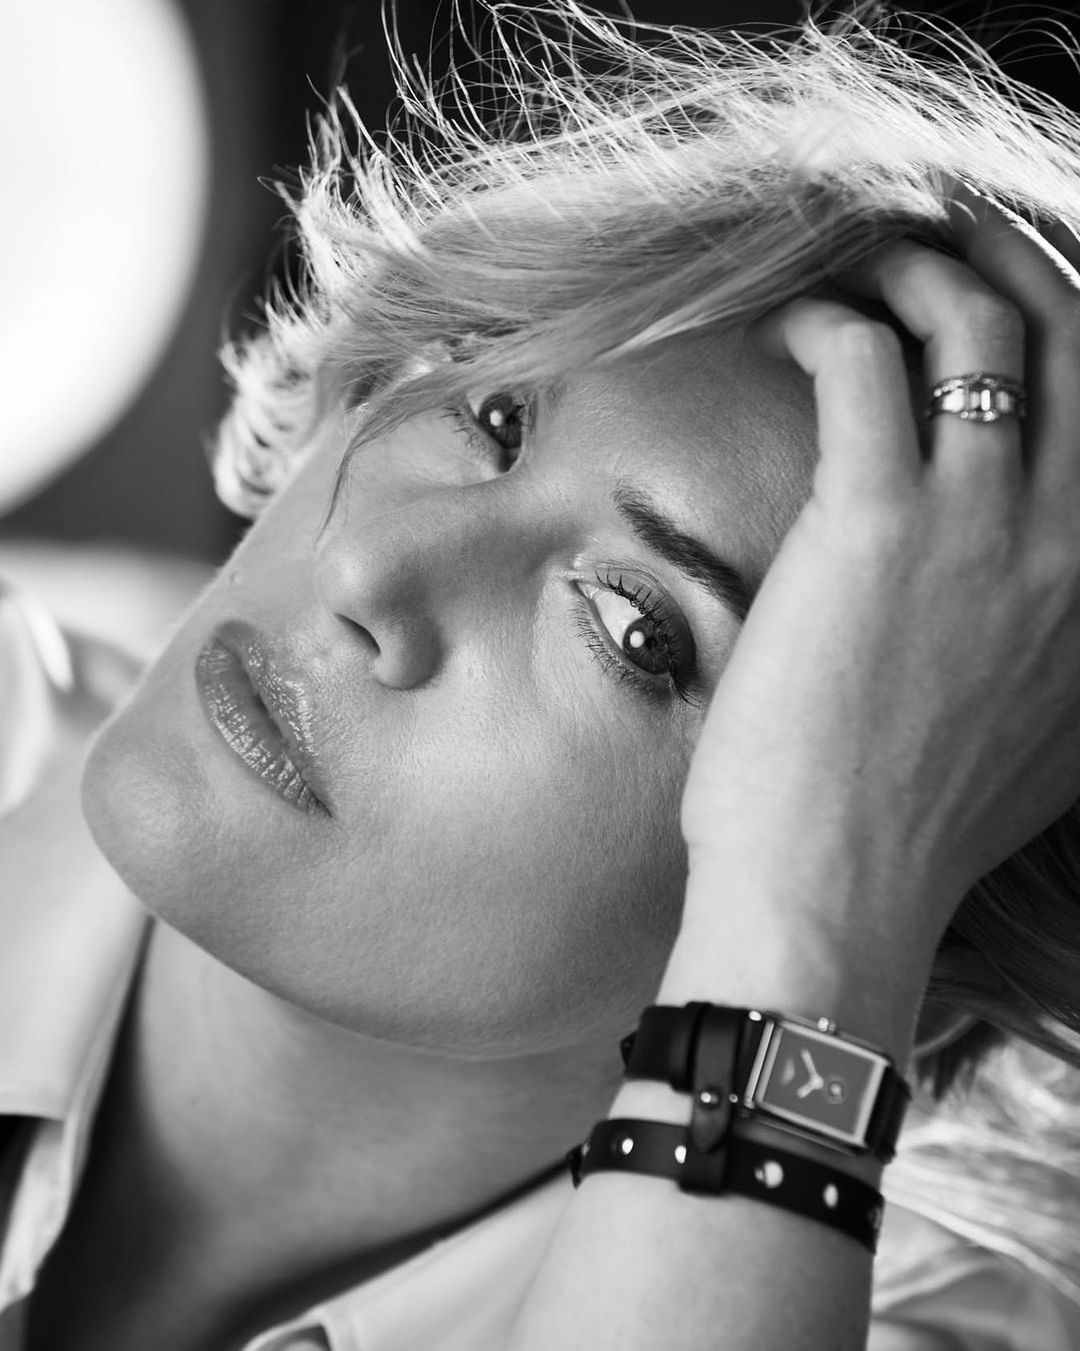 Longines proudly partners with YVY to give an elegant, unique and empowered expression to the LONGINES DOLCEVITA line. Showcasing the new LONGINES DOLCEVITA X YVY, Kate Winslet perfectly embodies the sophistication and elegance of the brand. @longines #EleganceisanAttitude #KateWinslet #LonginesDolceVita #LonginesxYVY